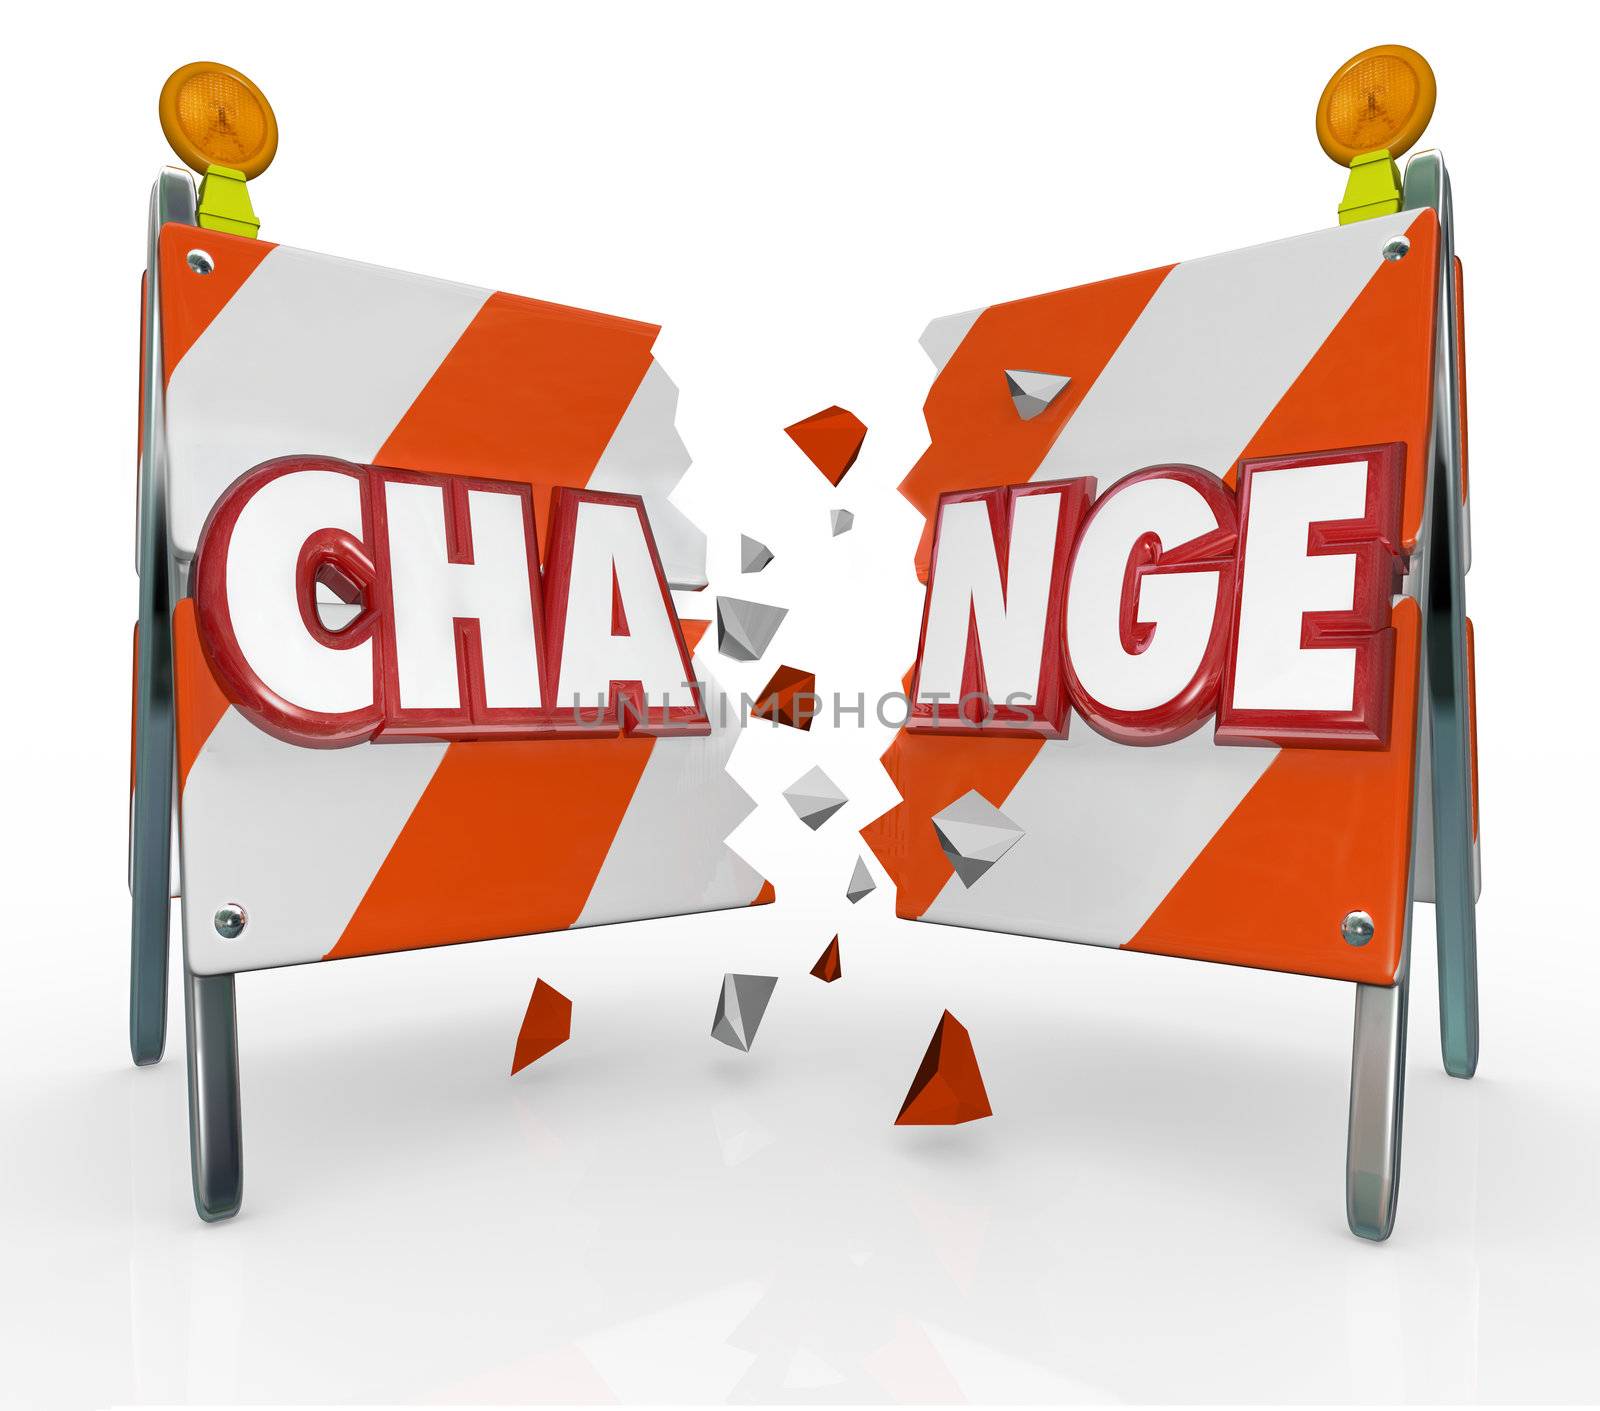 The word Change on a barrier being broken through to allow for evolution, revolution, adapting, progress or other movement forward to make improvements